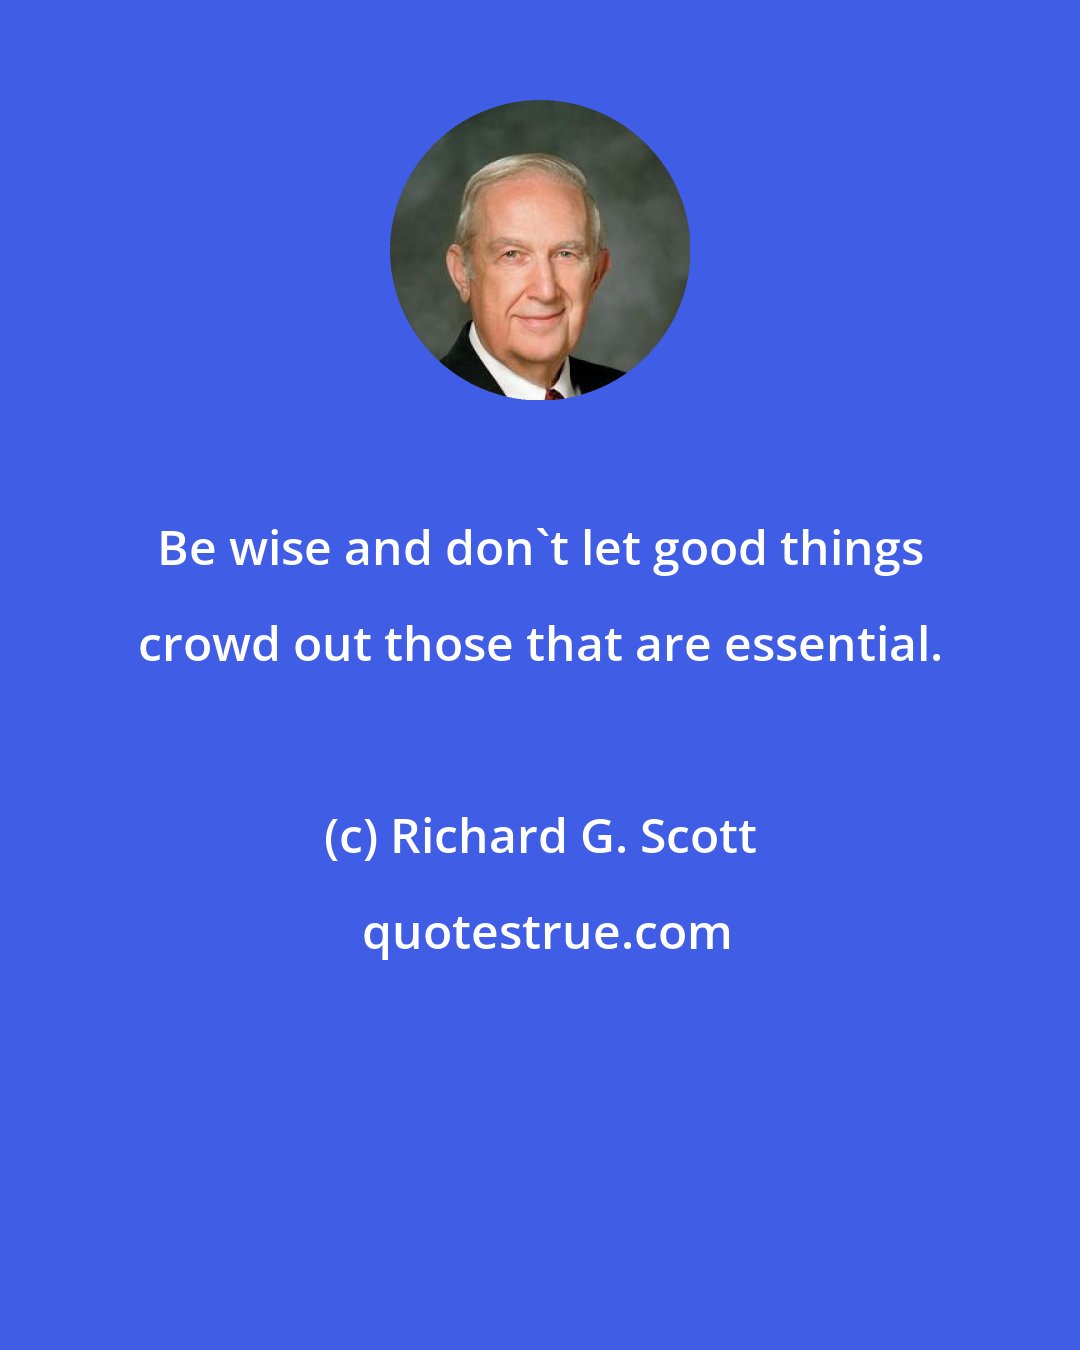 Richard G. Scott: Be wise and don't let good things crowd out those that are essential.